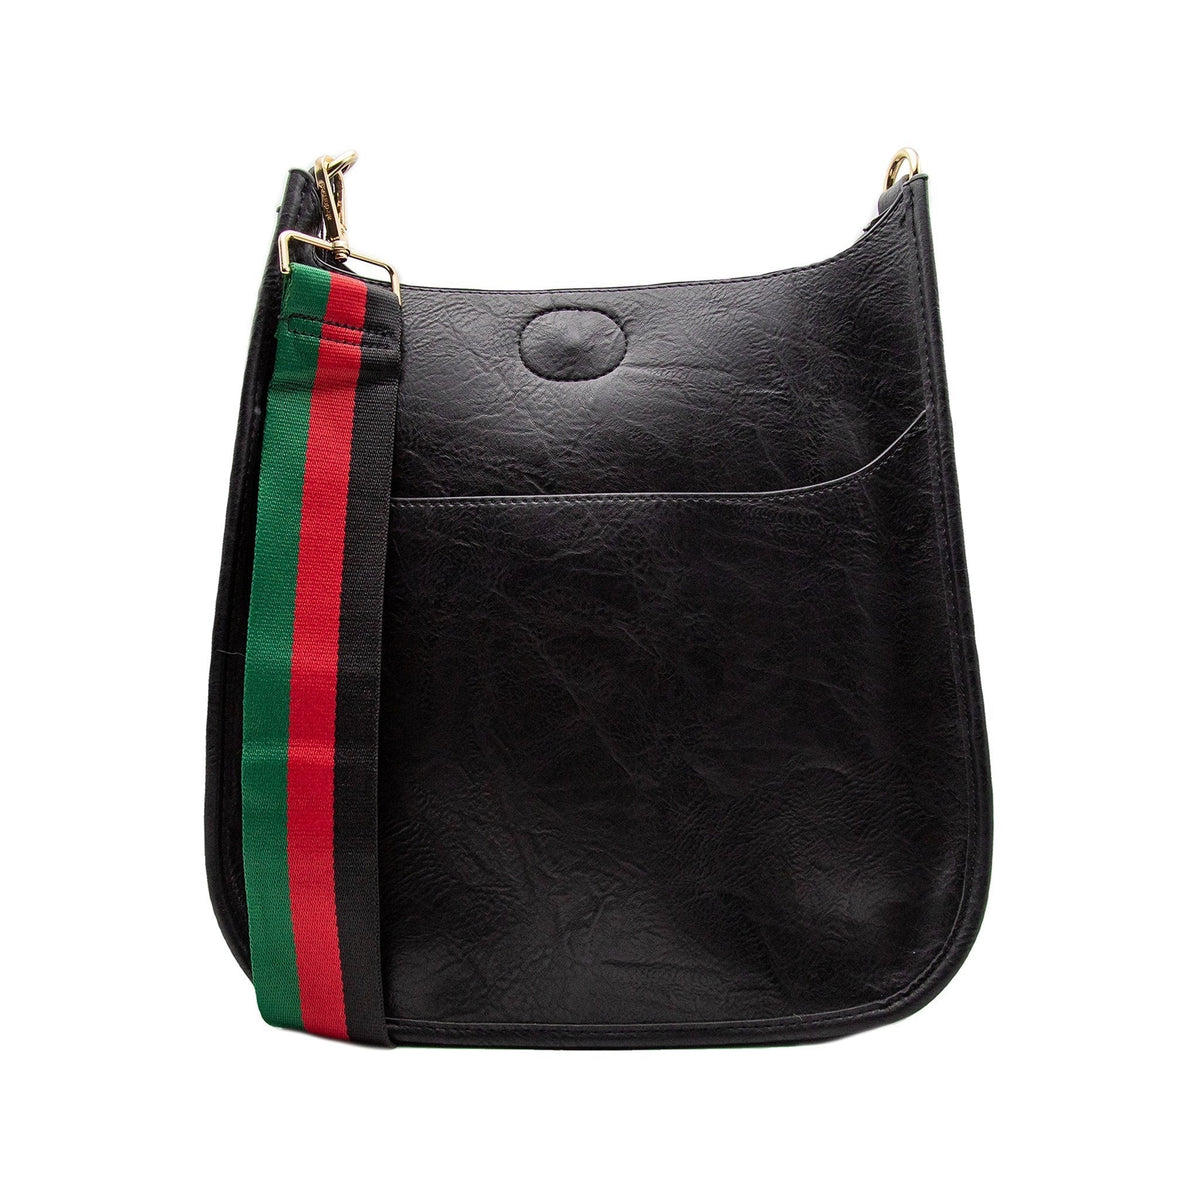 Black/Red/Green Strap for Handbags/Purses - Chic & Contemporary Design - Adjustable Shoulder to Cross Body (34-55) - Guitar Inspired Strap